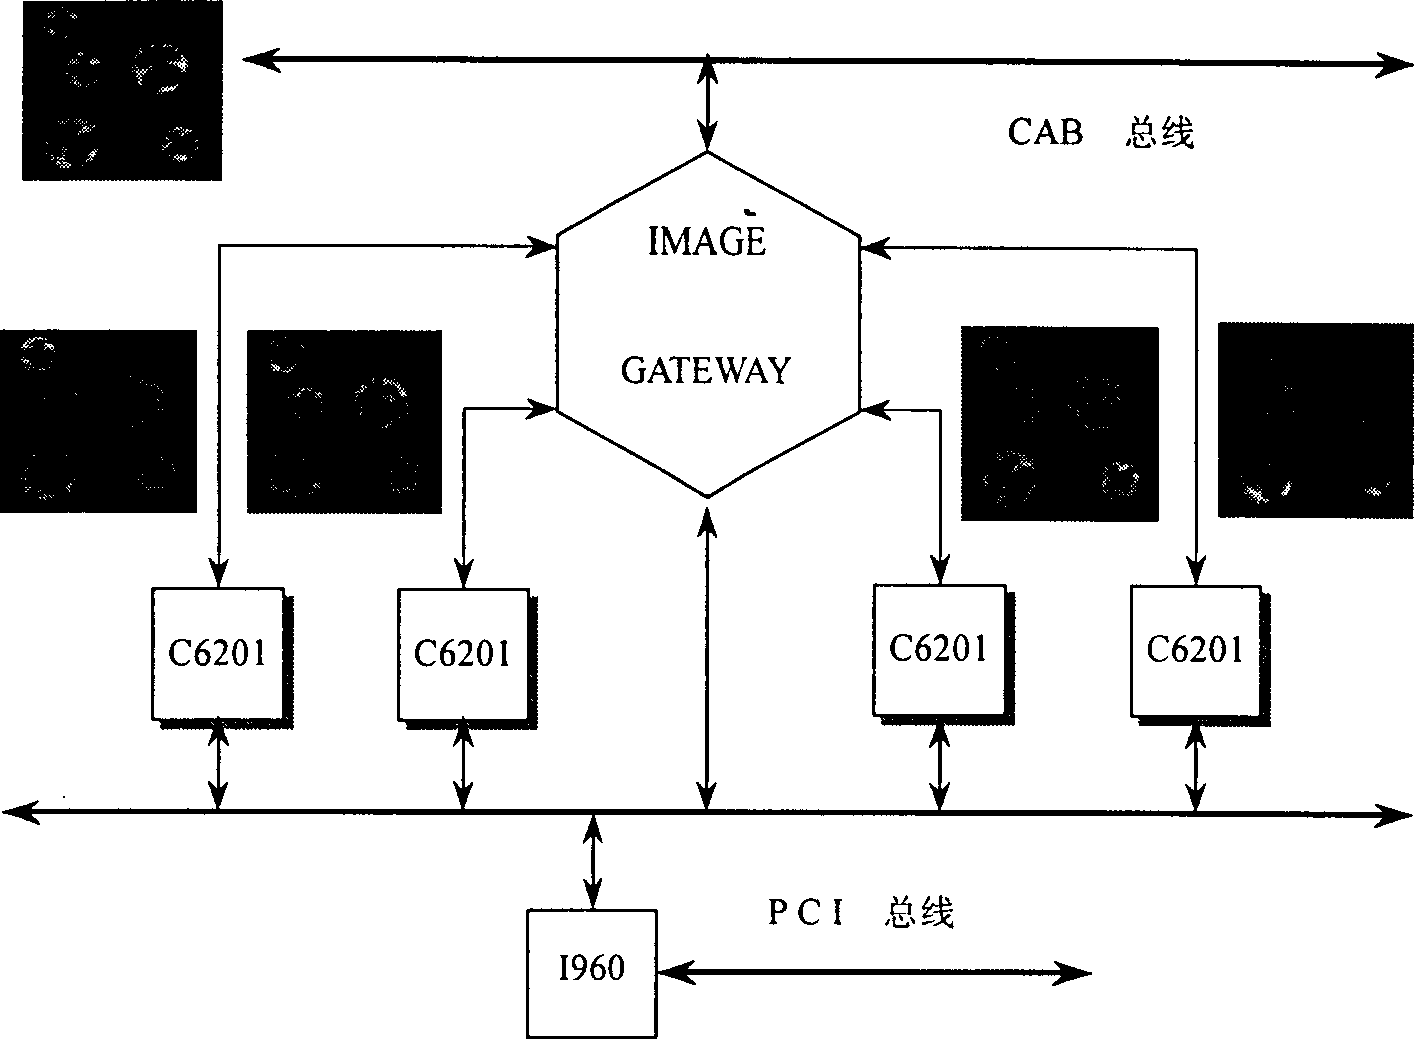 Ultra-spectrum image real-time compression system based on noise decomposing compression algorithm